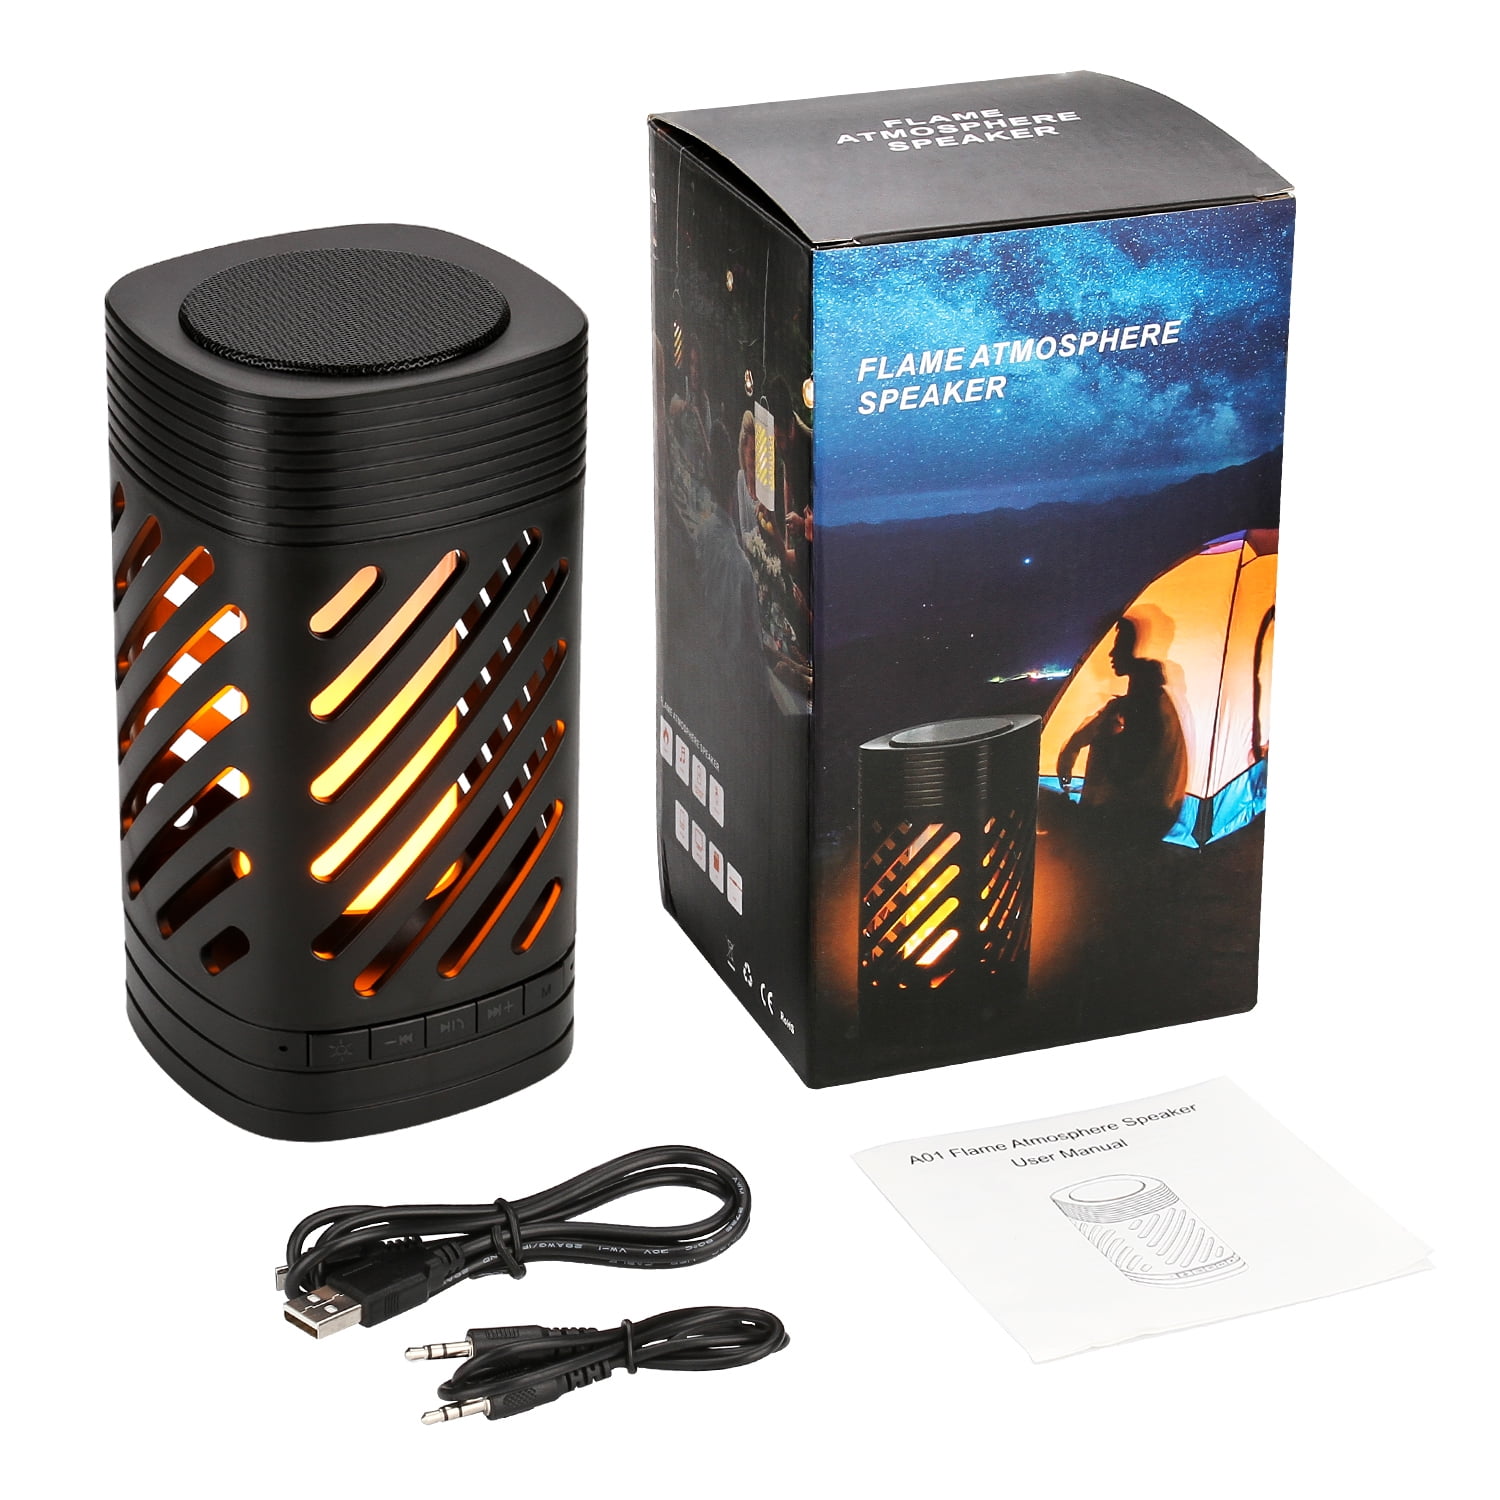 AGPtek Portable Bluetooth Speaker with Lights Wireless Speaker Smart Lamp for Camping, Outrage and Emergency